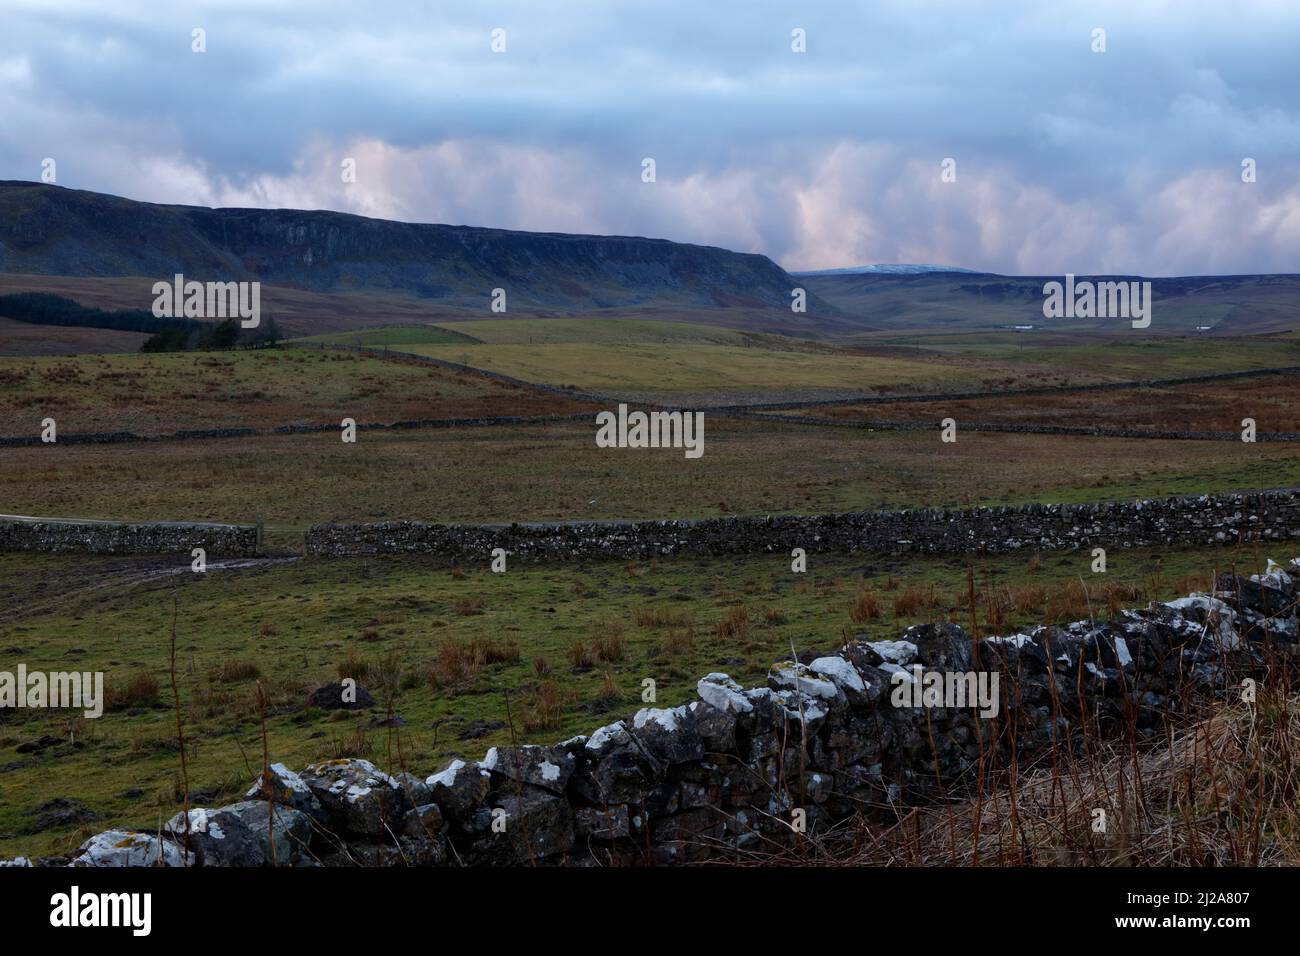 View across Cronkley Pasture to Cronkley Scar, Upper Teesdale, County Durham, England, UK Stock Photo